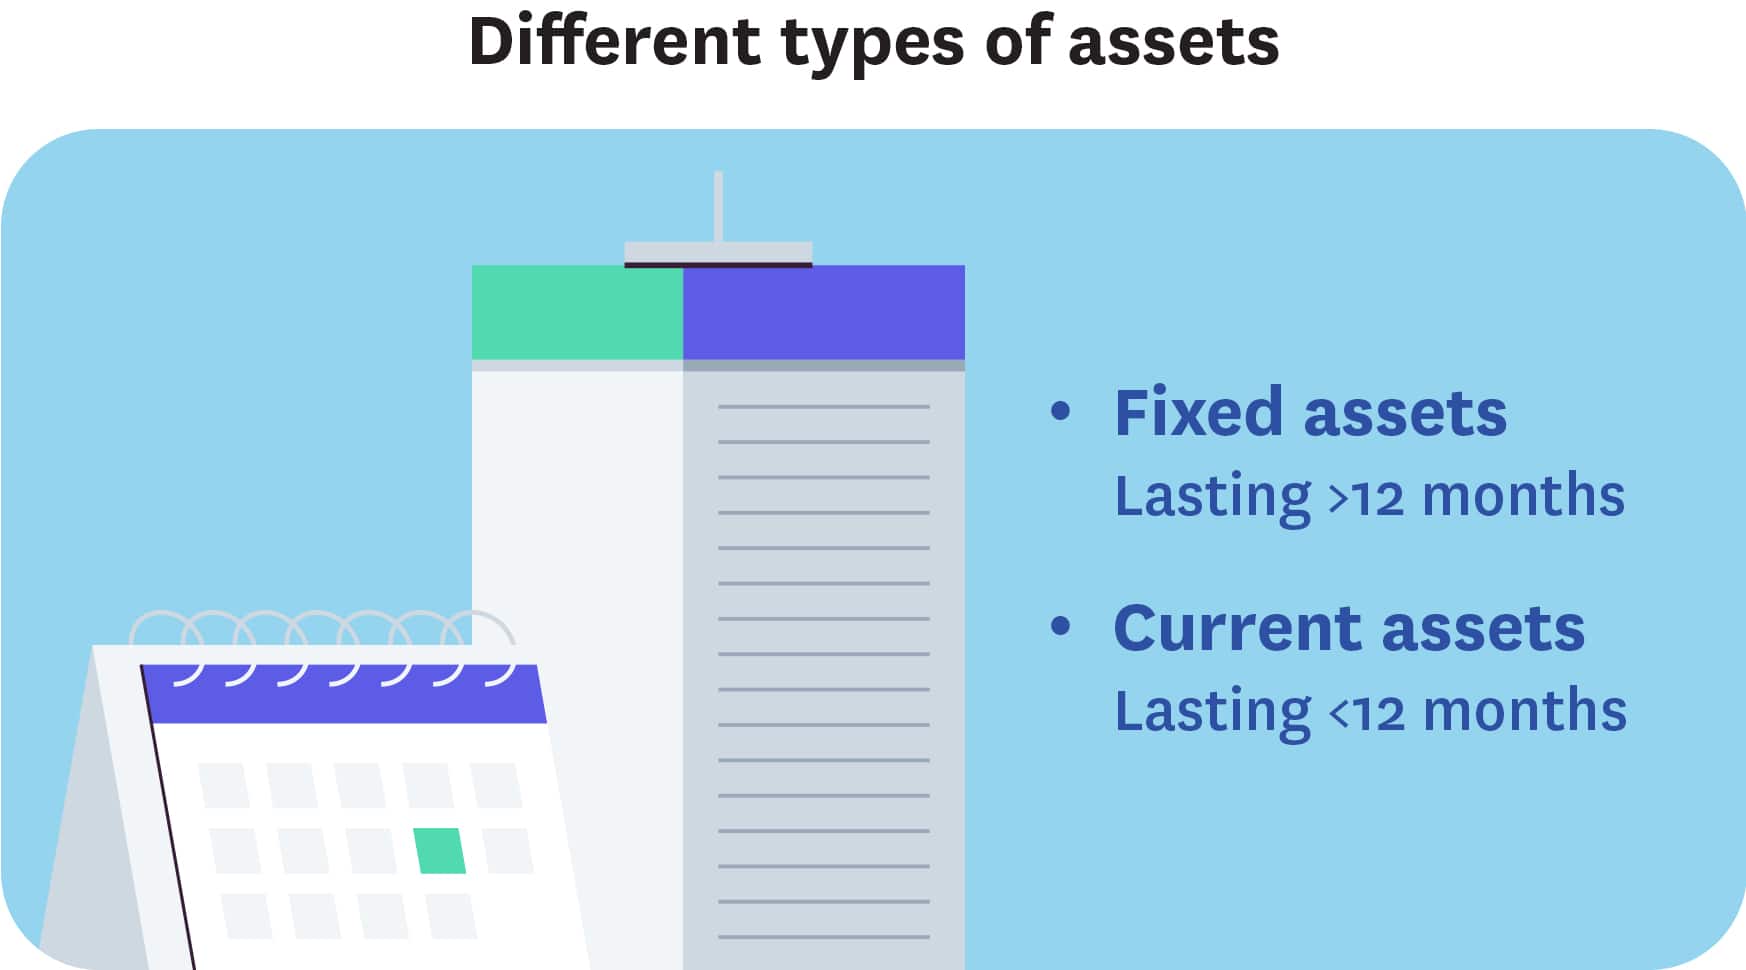 Fixed assets last longer than 12 months, while current assets last less than 12 months.